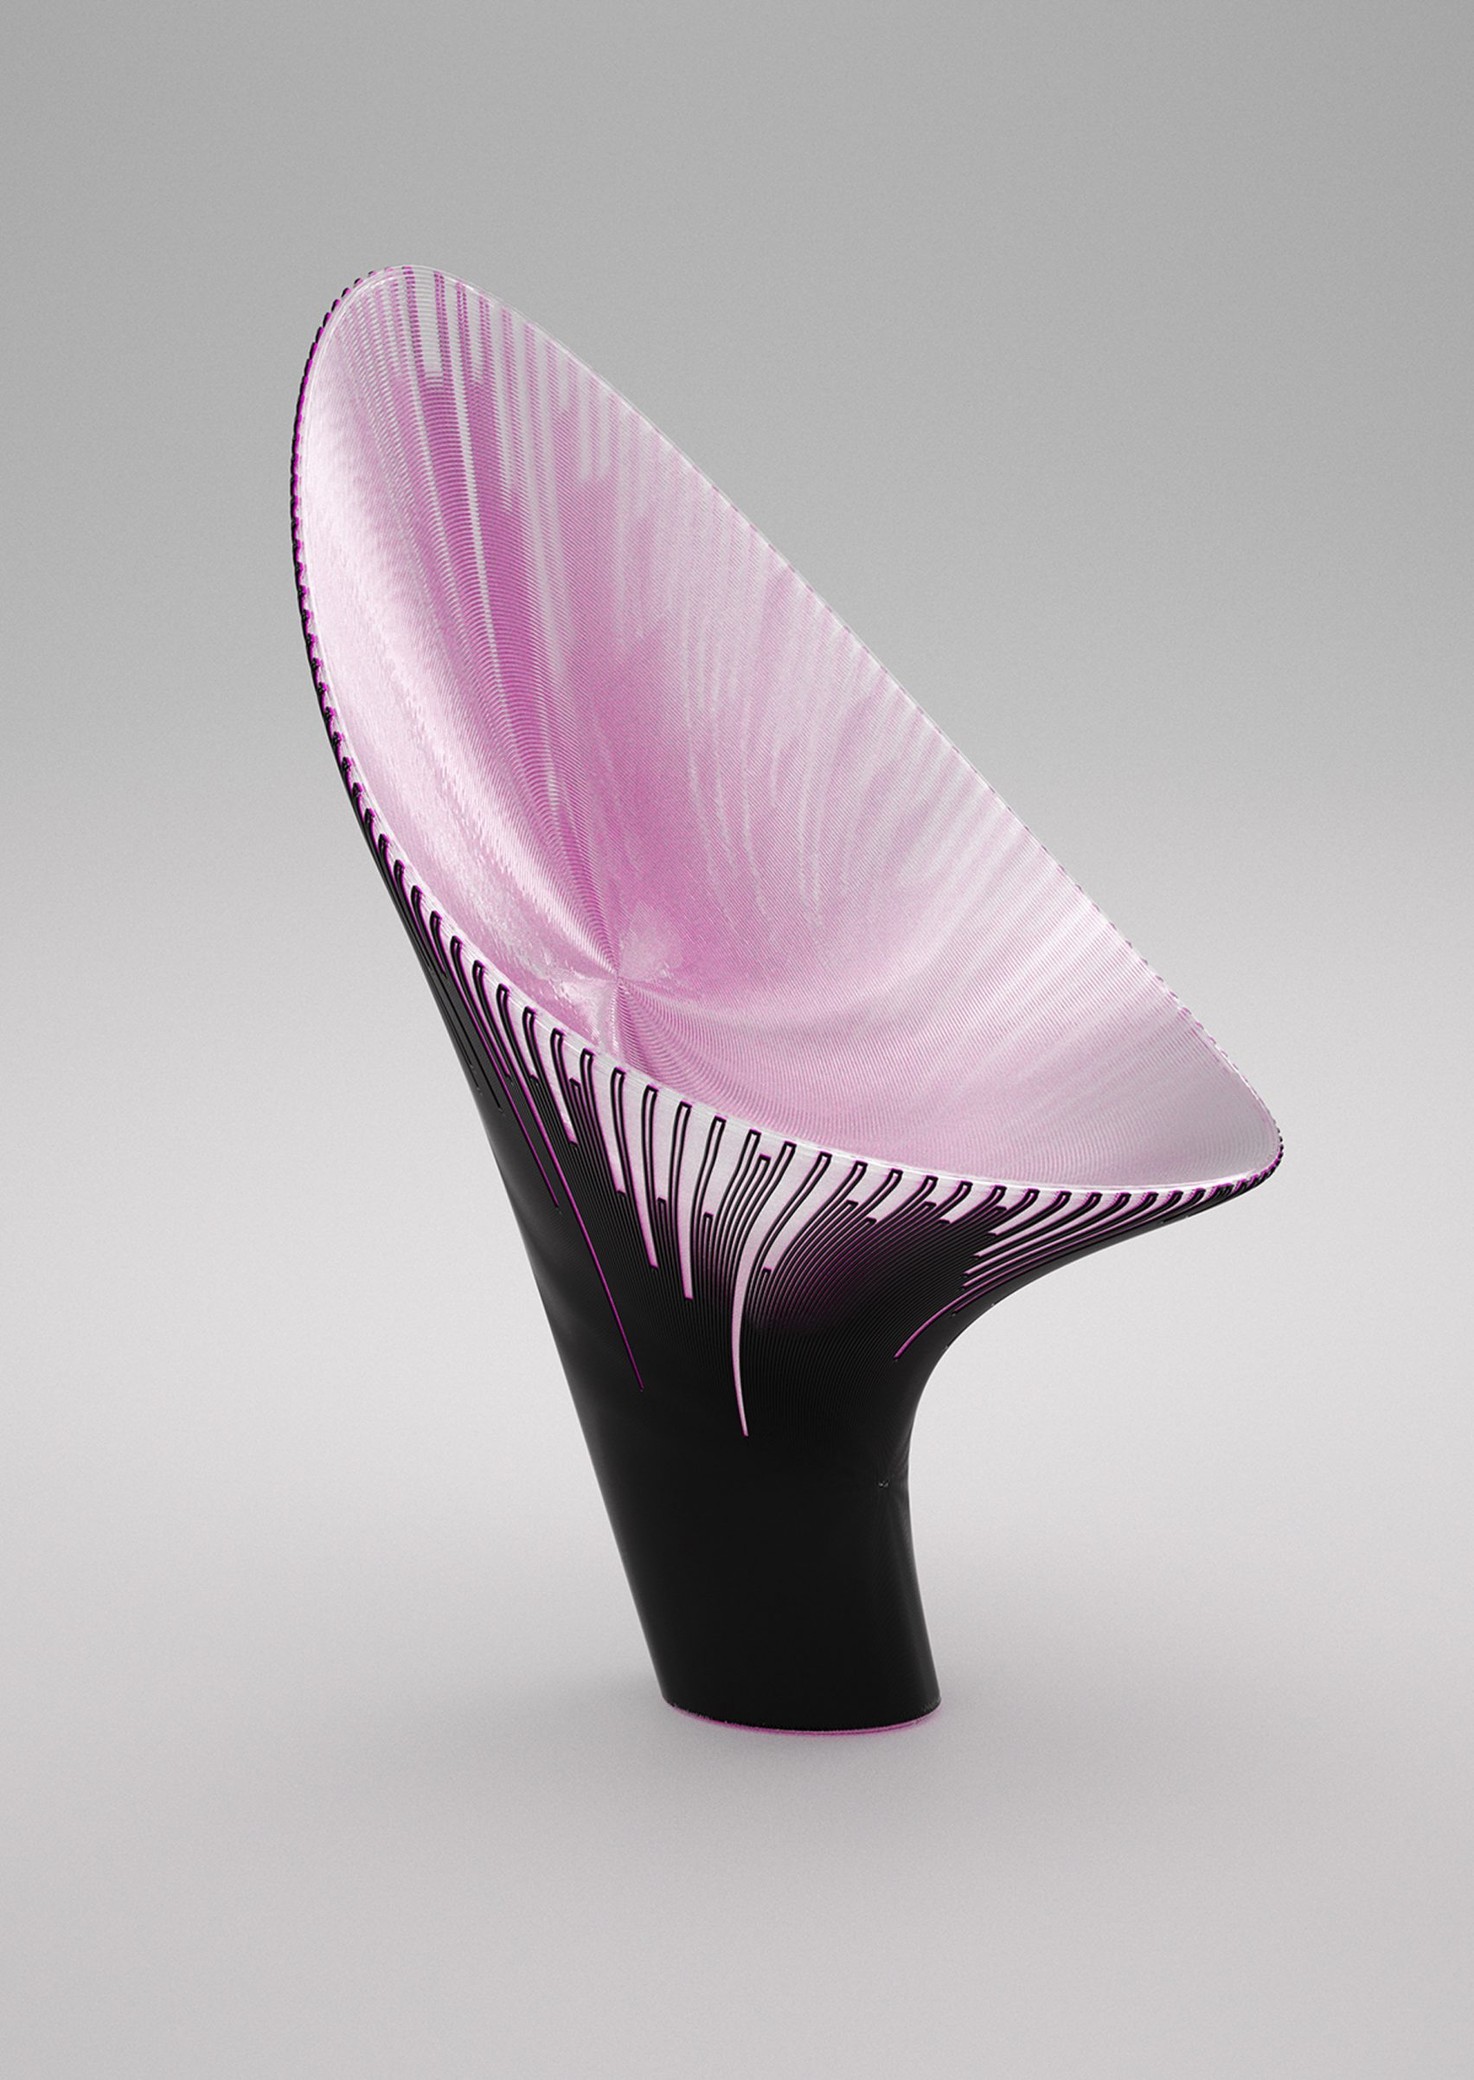 3D-Printed Chairs by Zaha Hadid Architects